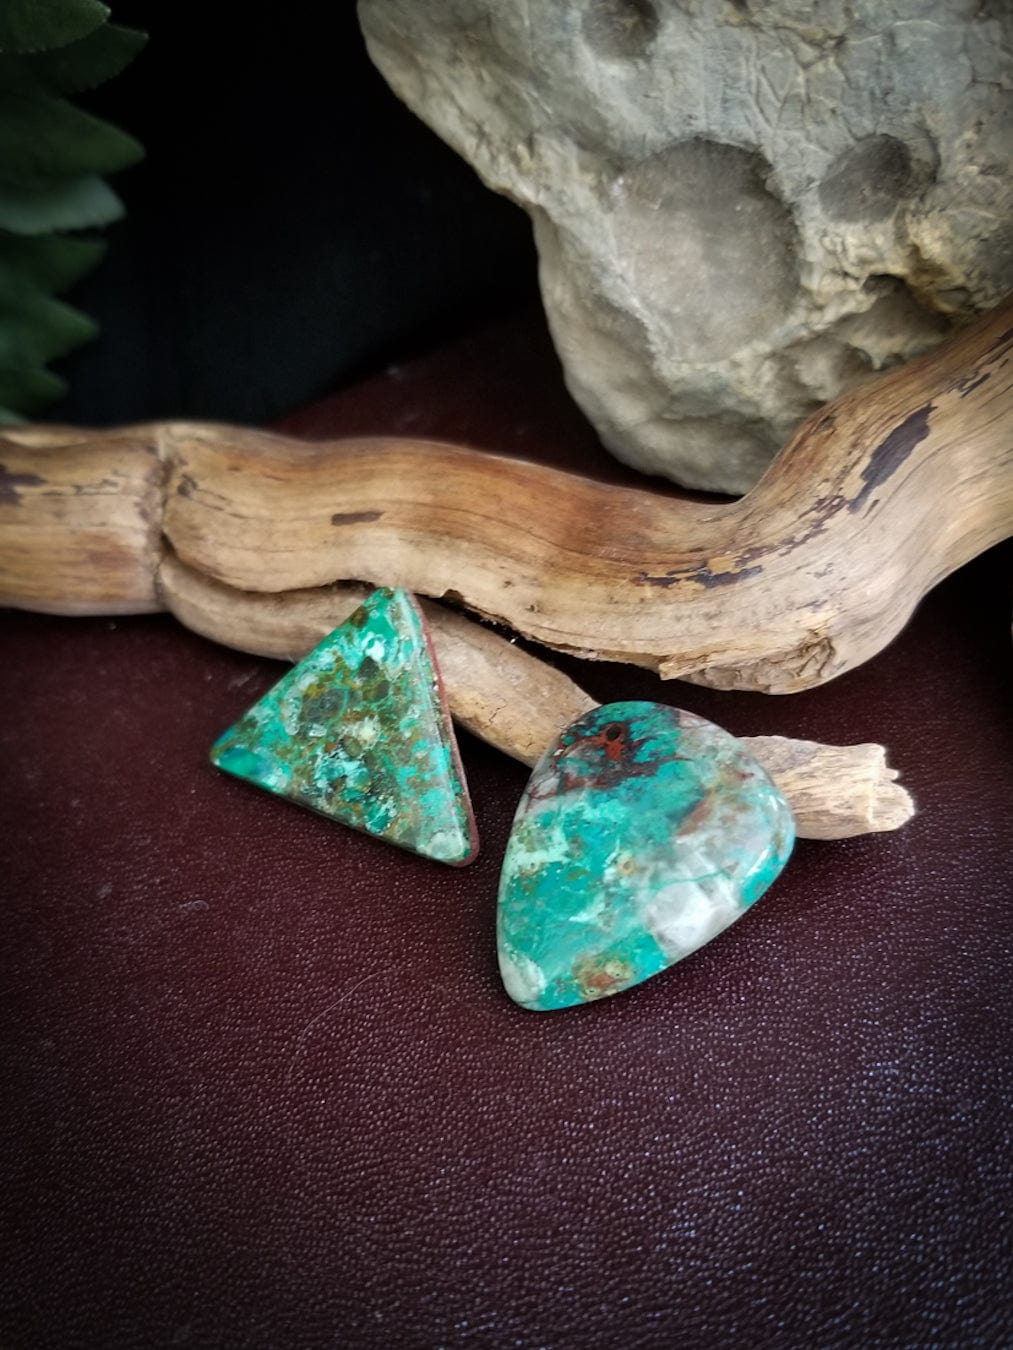 Chrysocolla triangle and teardrop shaped cabochons. Greens, turquoise, black, and reds